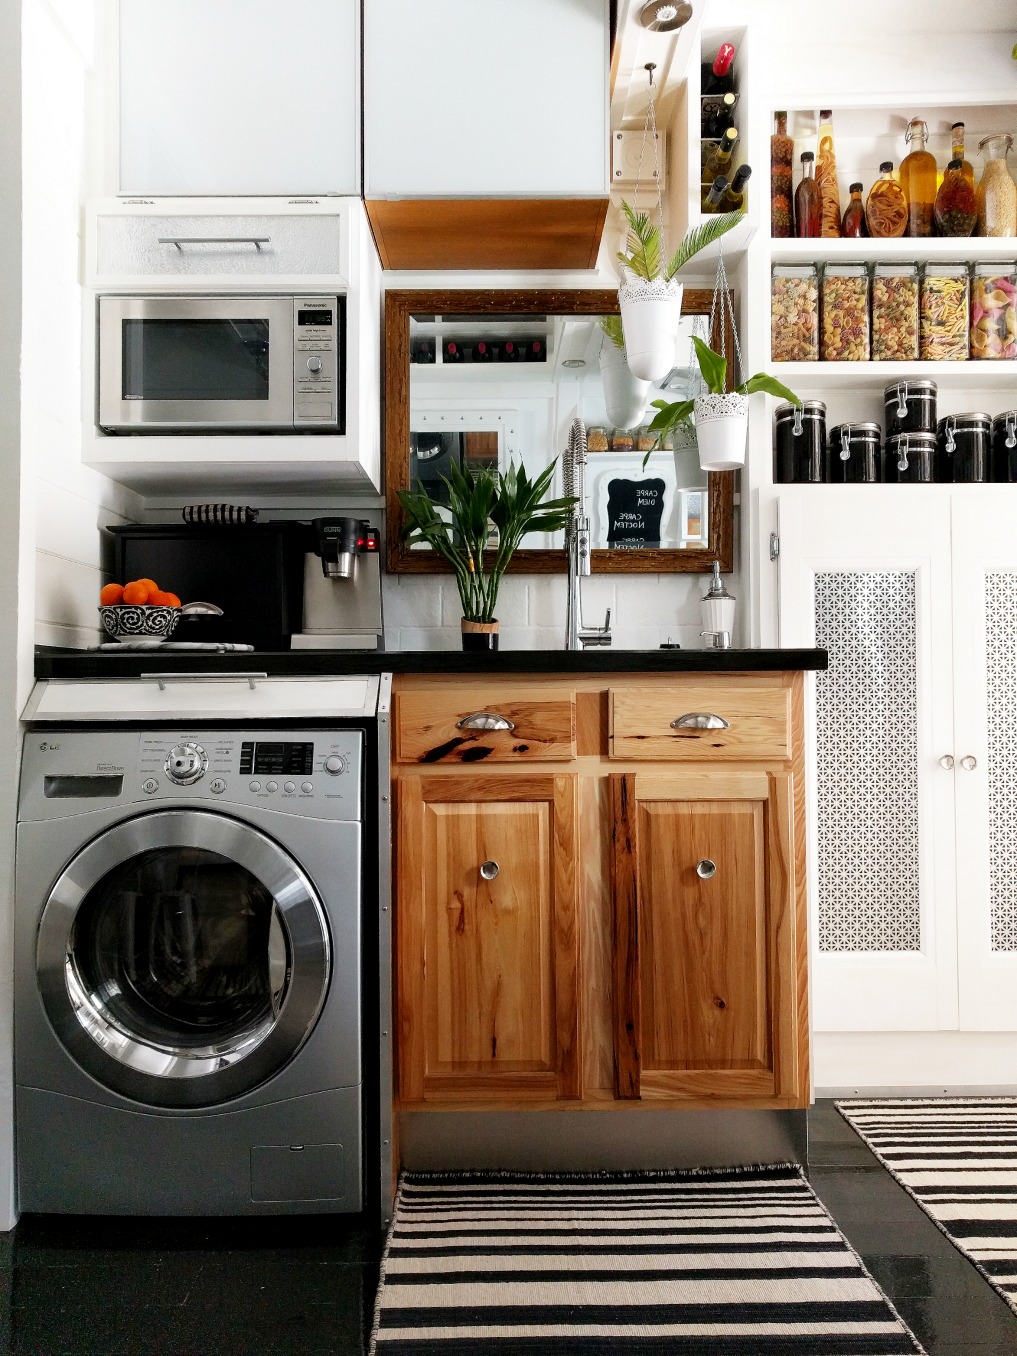 Eclectic Home Tour - Insieme House - tour this tiny house with a combined kitchen and laundry room with lots of clever storage